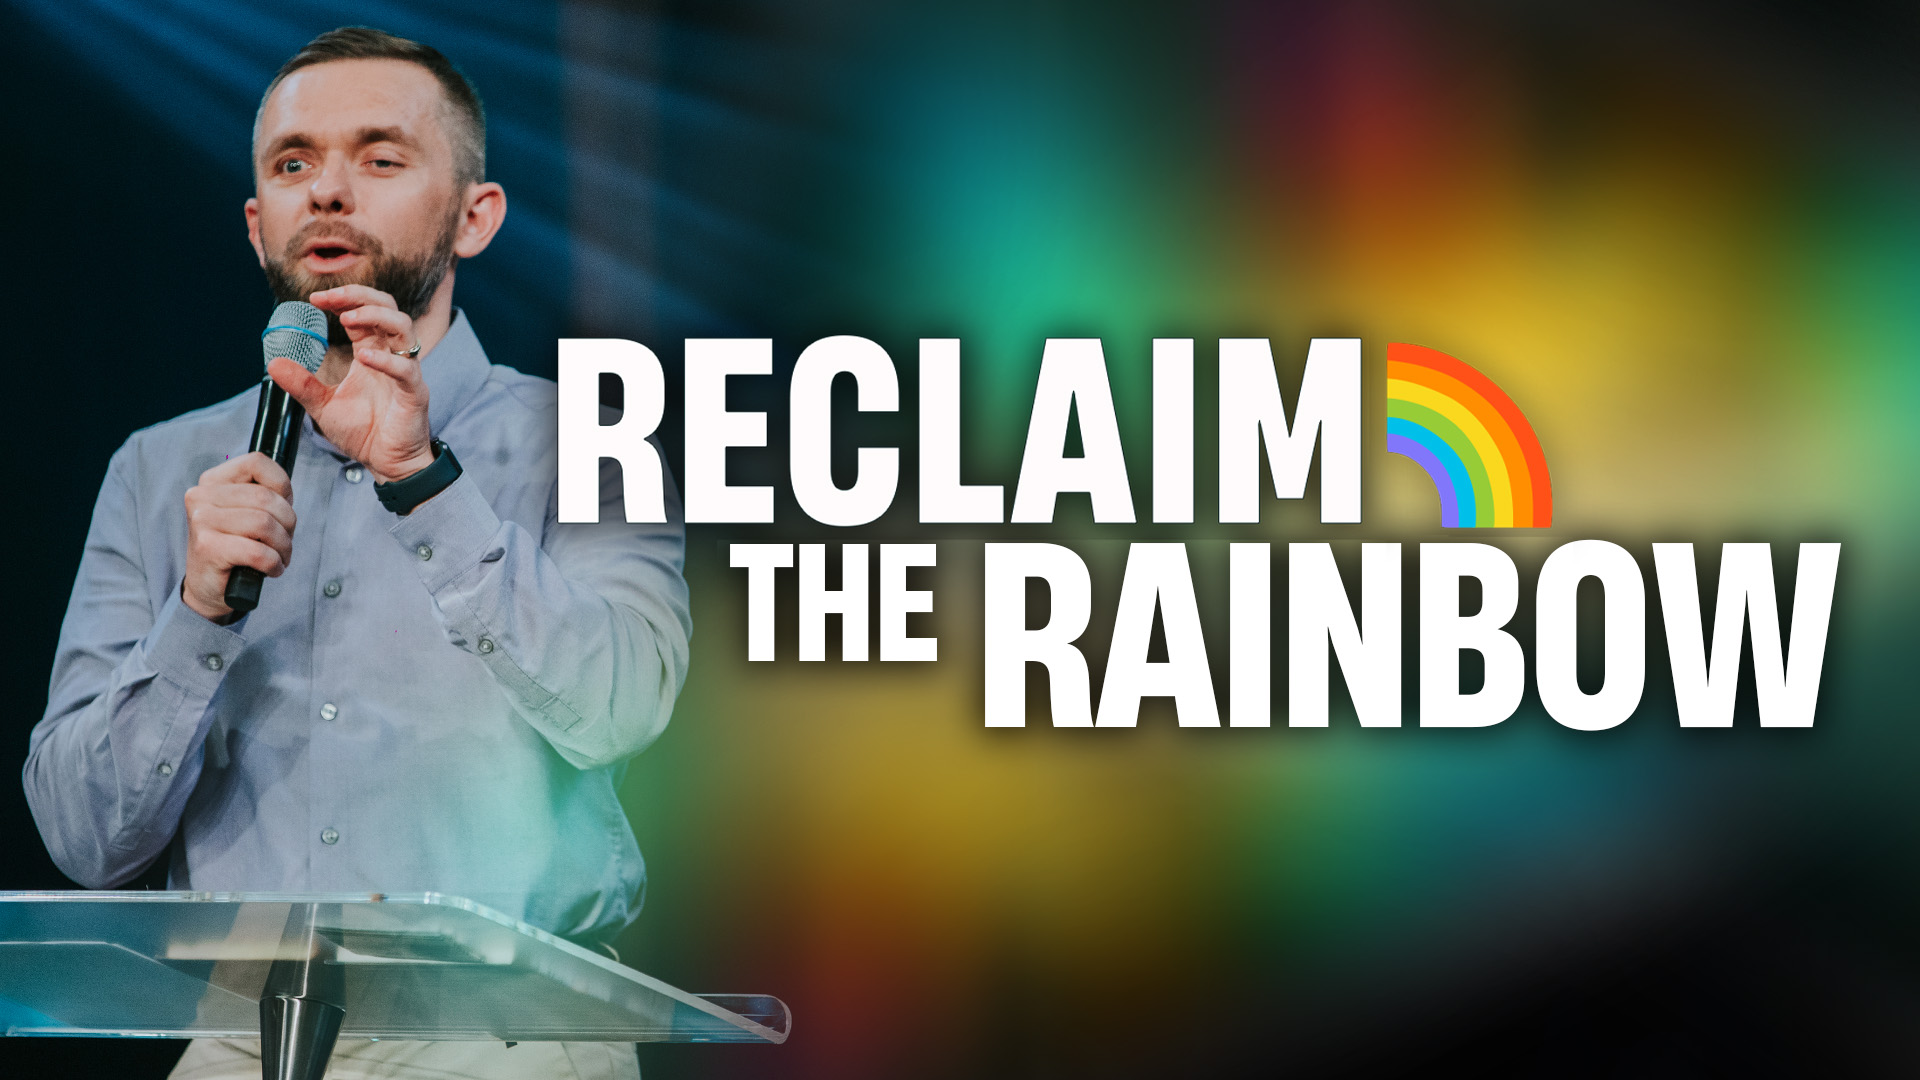 Featured Image for “Reclaim the Rainbow”